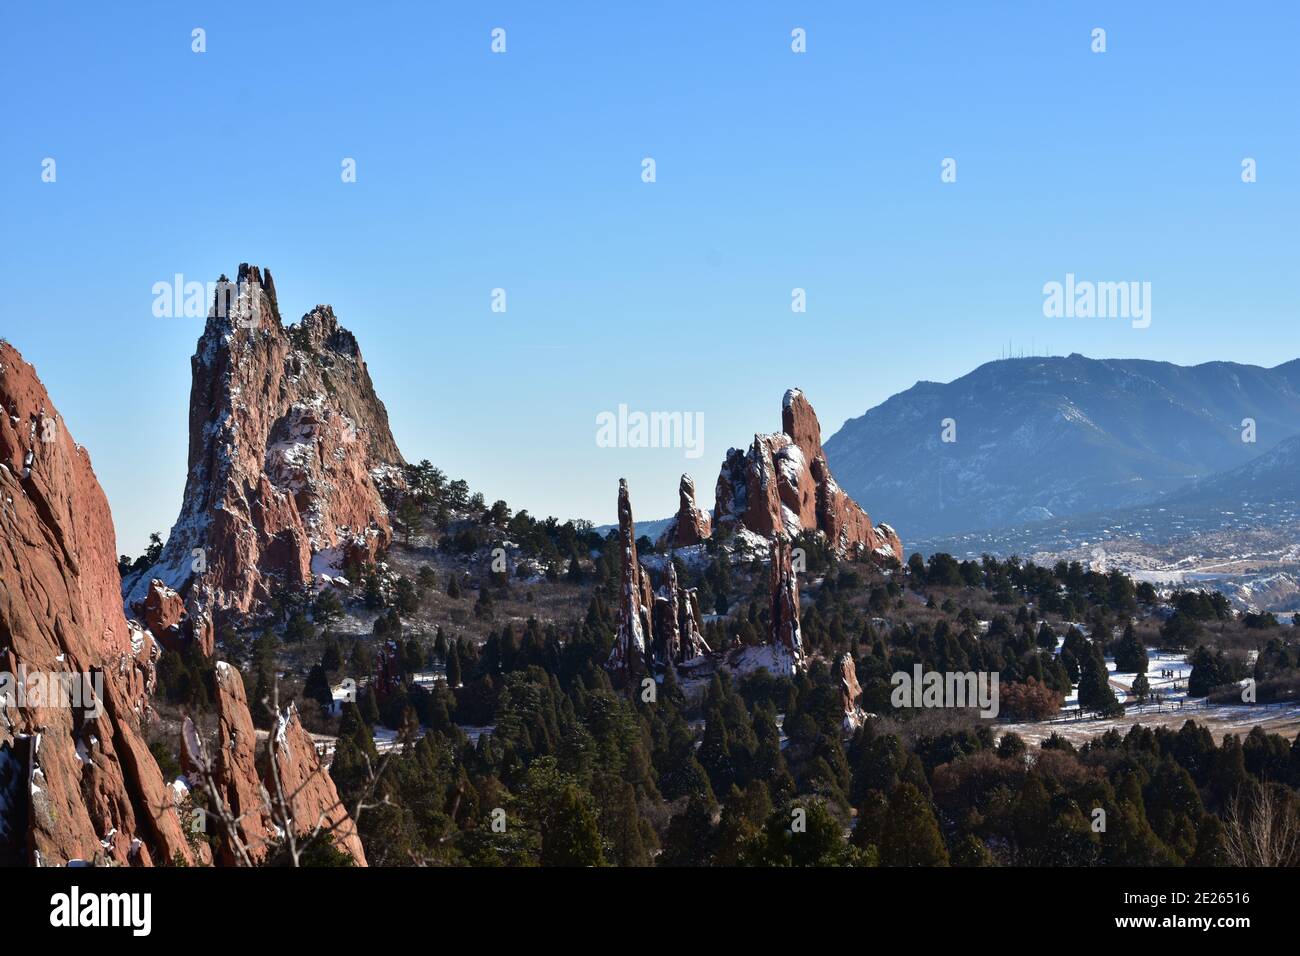 Blue skies over Garden of the Gods with Norad and Cheyenne Mountain in the background after a winter storm Stock Photo